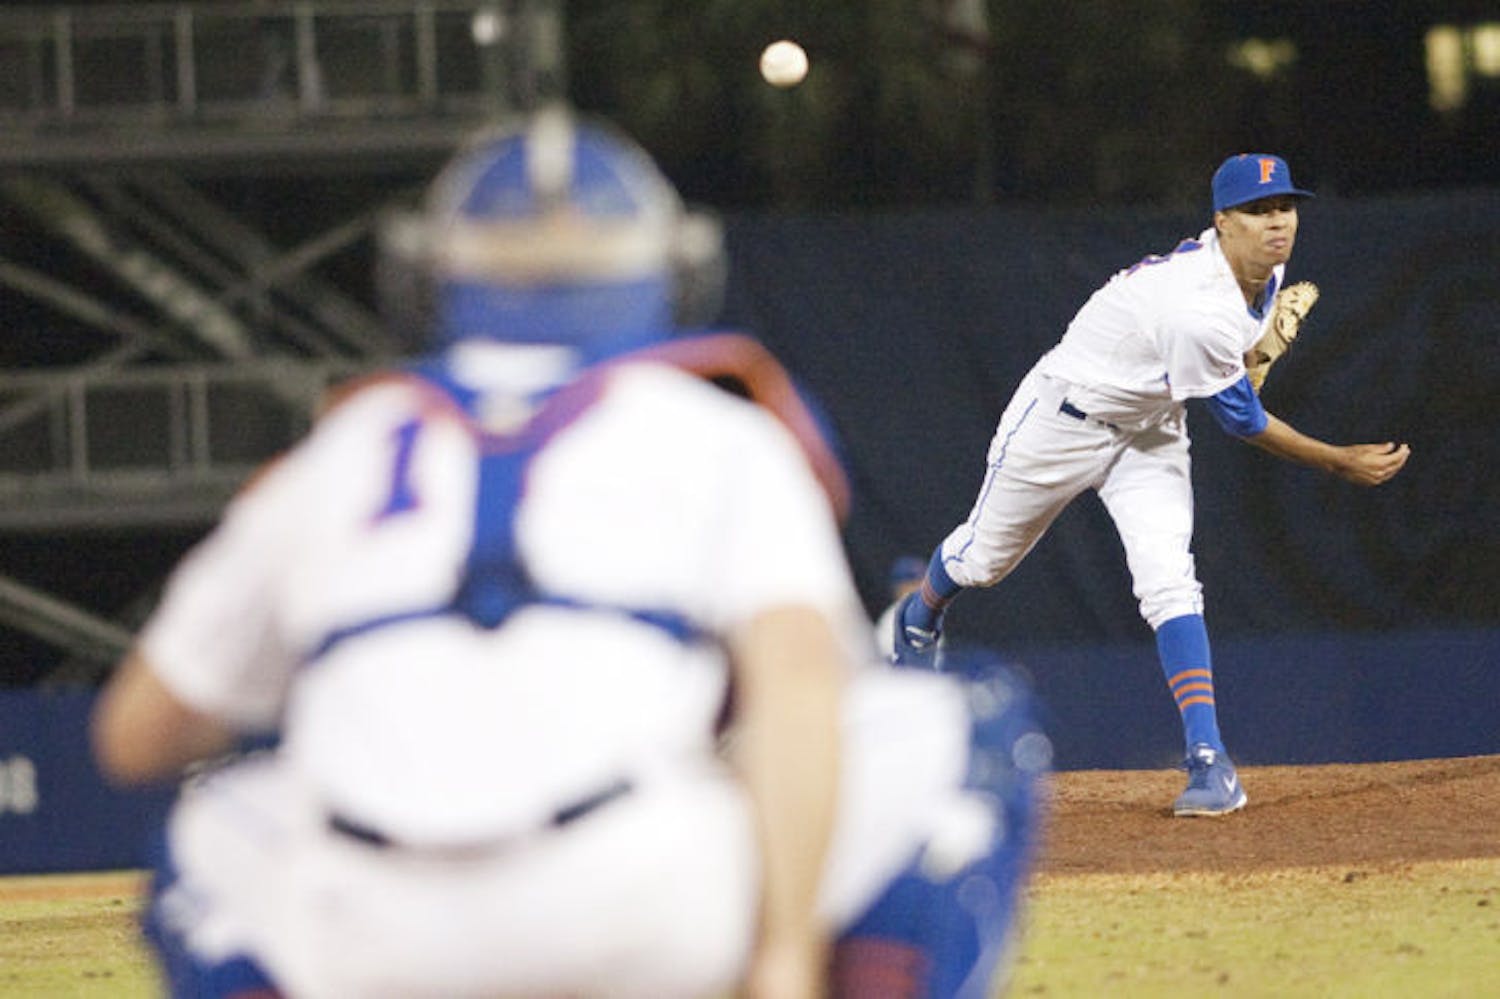 Freshman starting pitcher Jay Carmichael warms up between innings during Florida’s 4-1 win against Kentucky on March 15 at McKethan Stadium. Carmichael only pitched 1.2 innings in April while dealing with arm soreness.